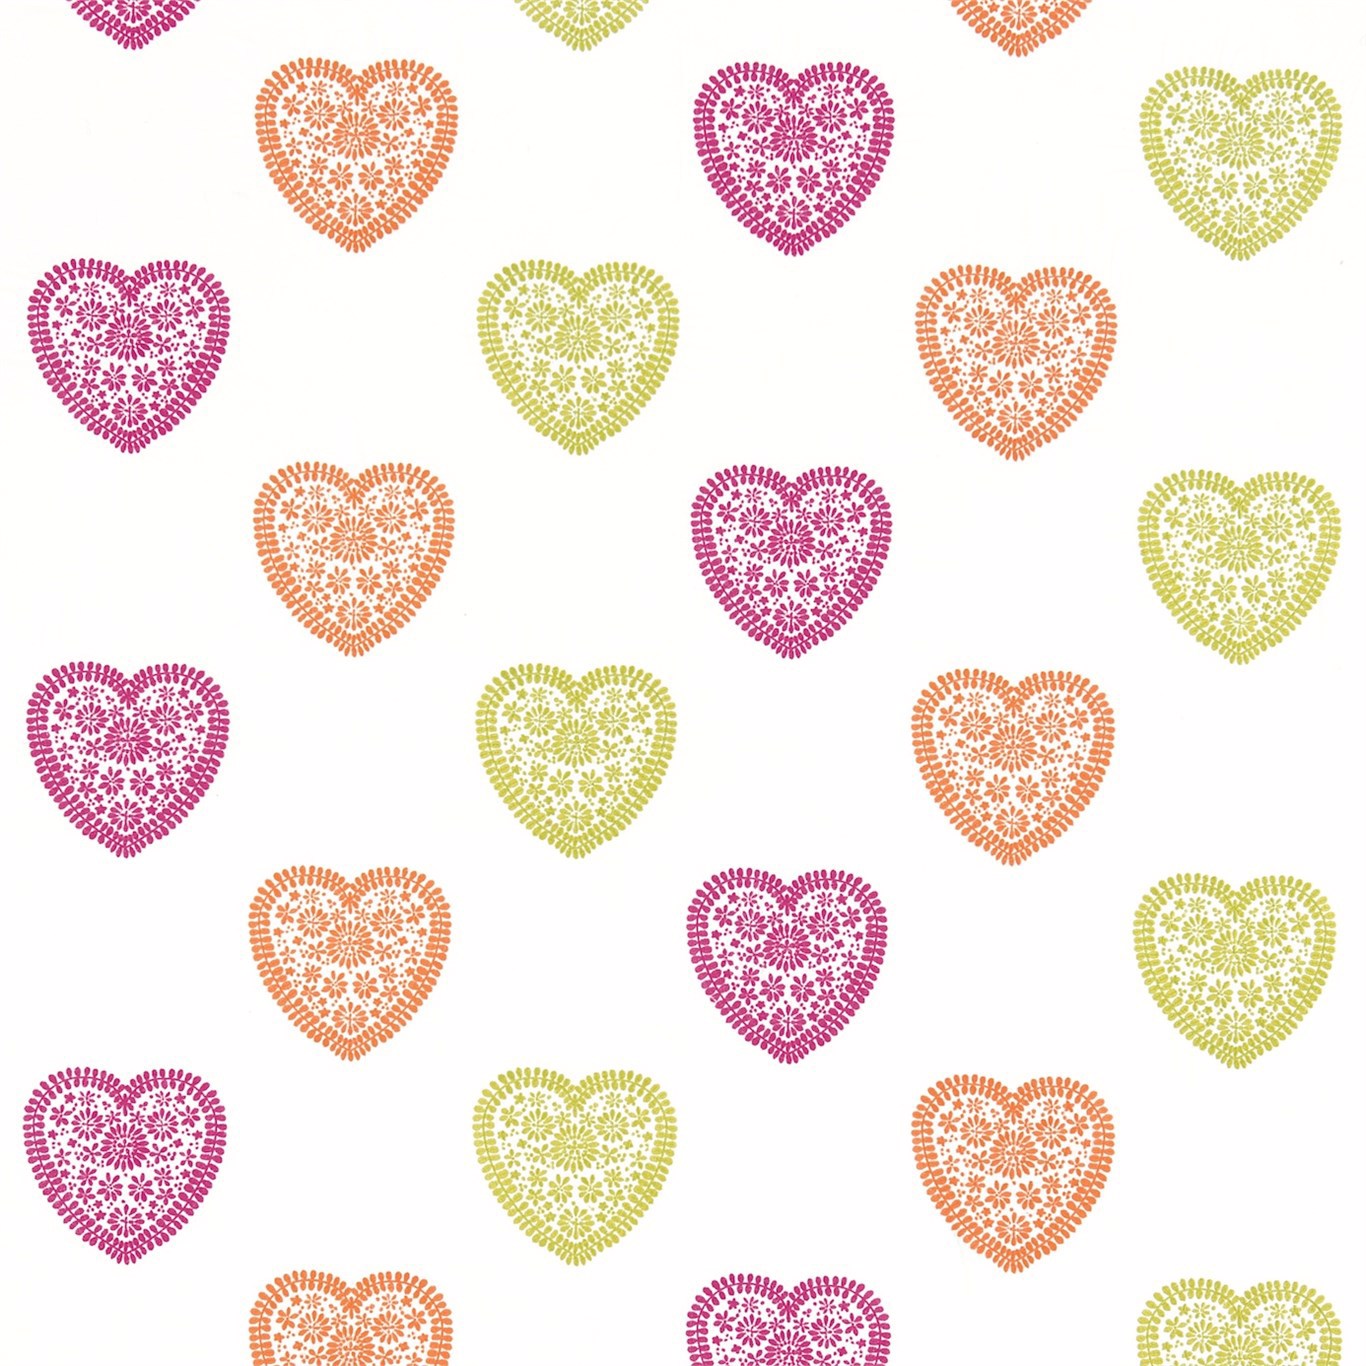 Sweet Heart Lime/Orange/Pink Fabric by HAR